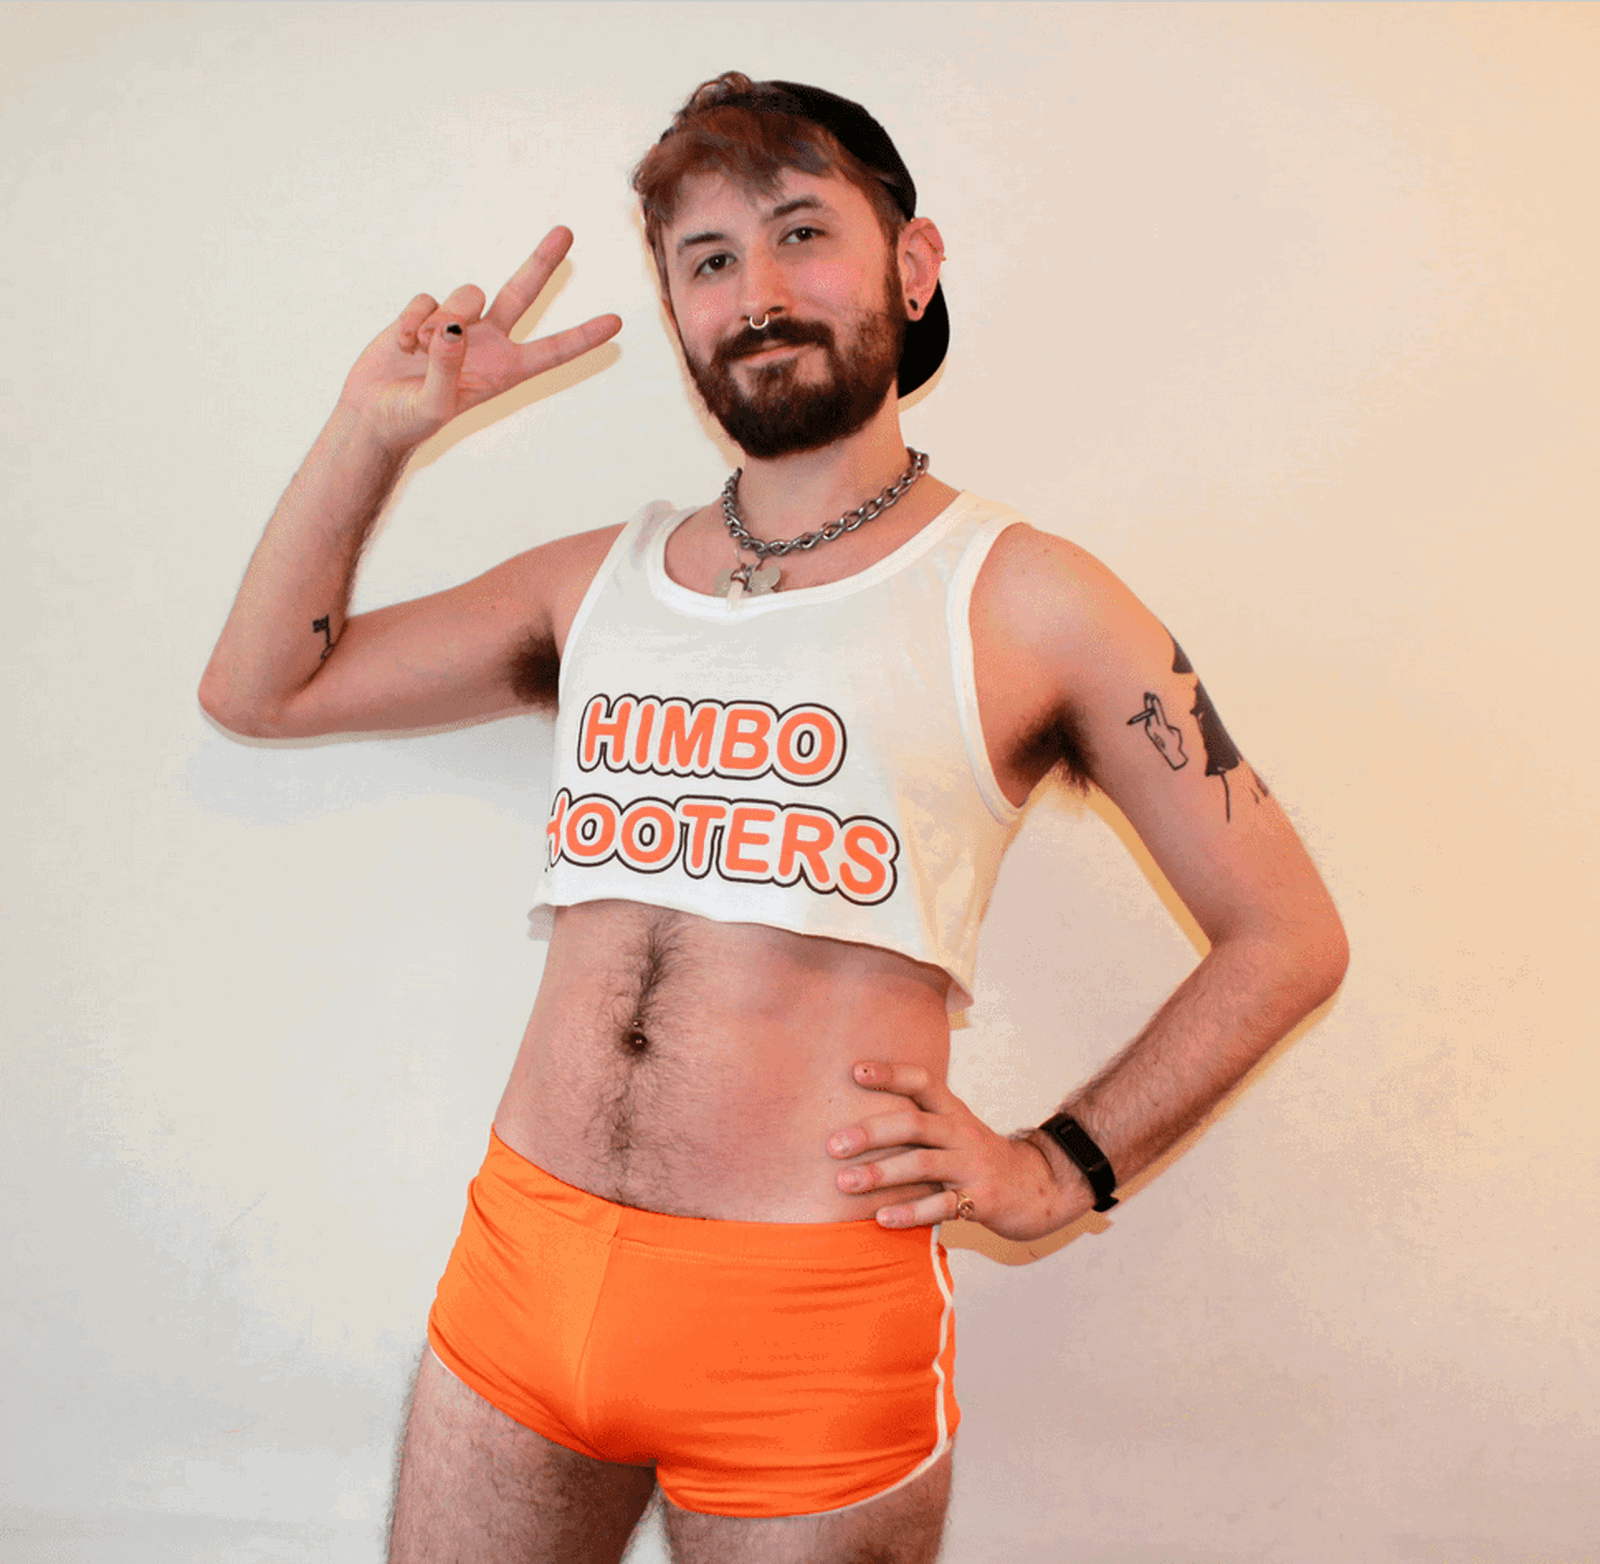 Photo by DirtyDaddyFunStuff with the username @DirtyDaddyPorn, who is a verified user,  May 2, 2024 at 8:49 PM and the text says 'Hot 21 #otters #hairy #hung #cowboys #showers #gyms #bald #beards #stubble #tats #armpits'